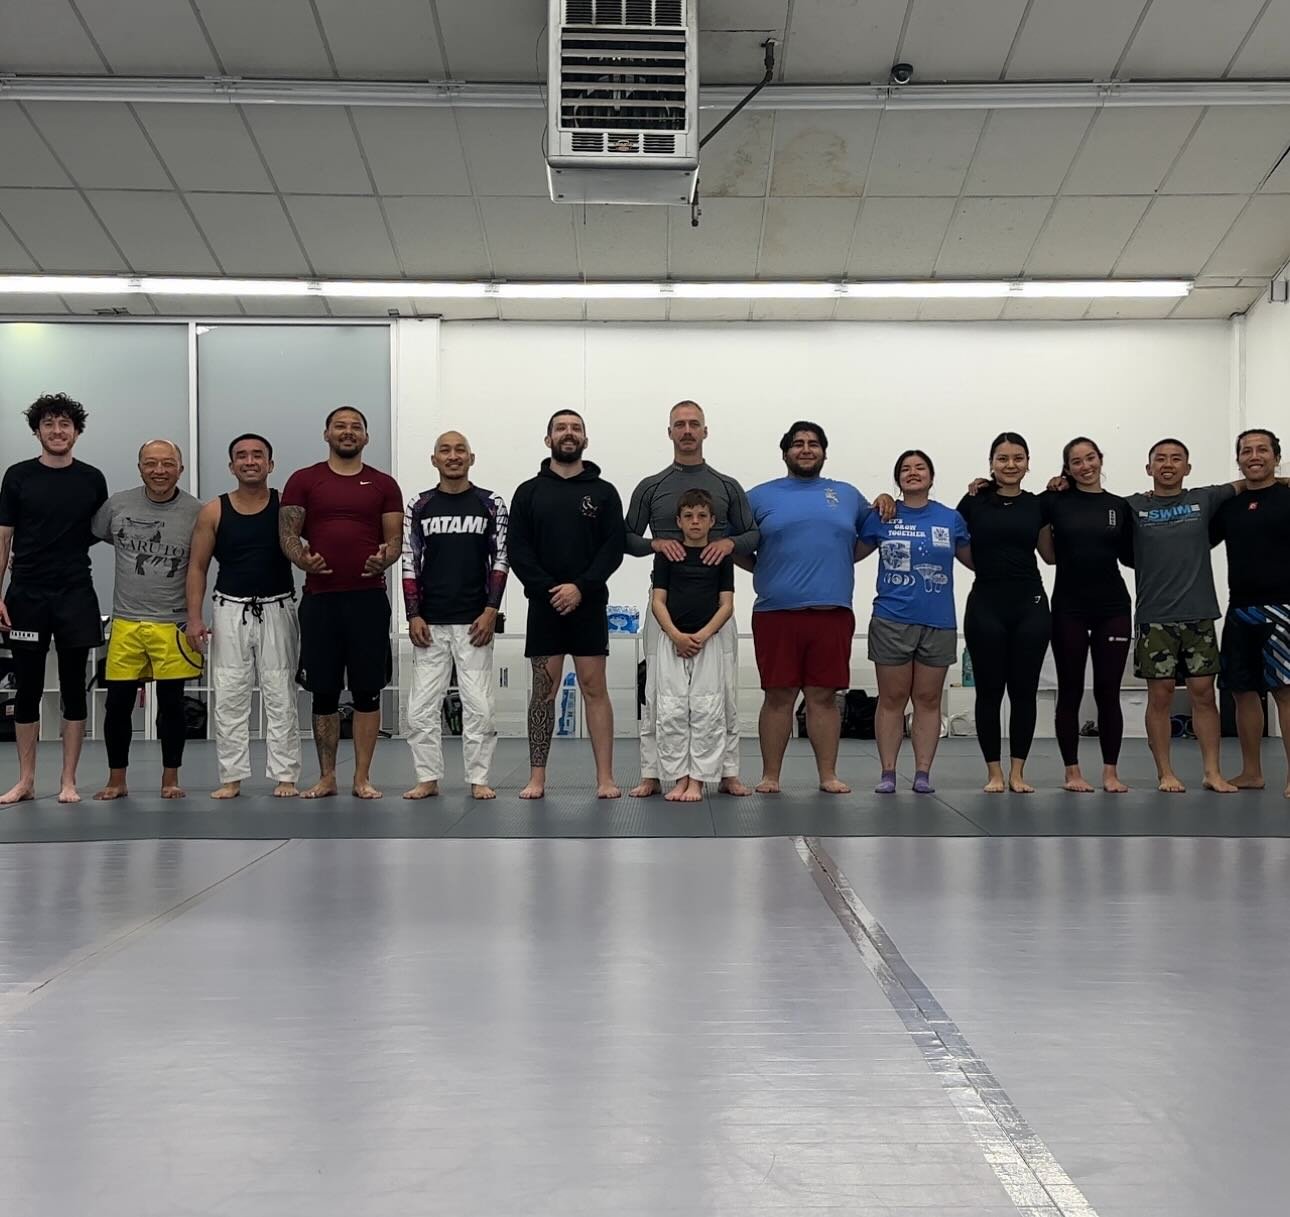 Had a blast teaching these dedicated grapplers @sanlorenzojiujitsu strategies they can use to improve their mobility in an effort to level up their game on the mats.
&bull;
As always, thank you Manny and the San Lorenzo crew for welcoming us and open